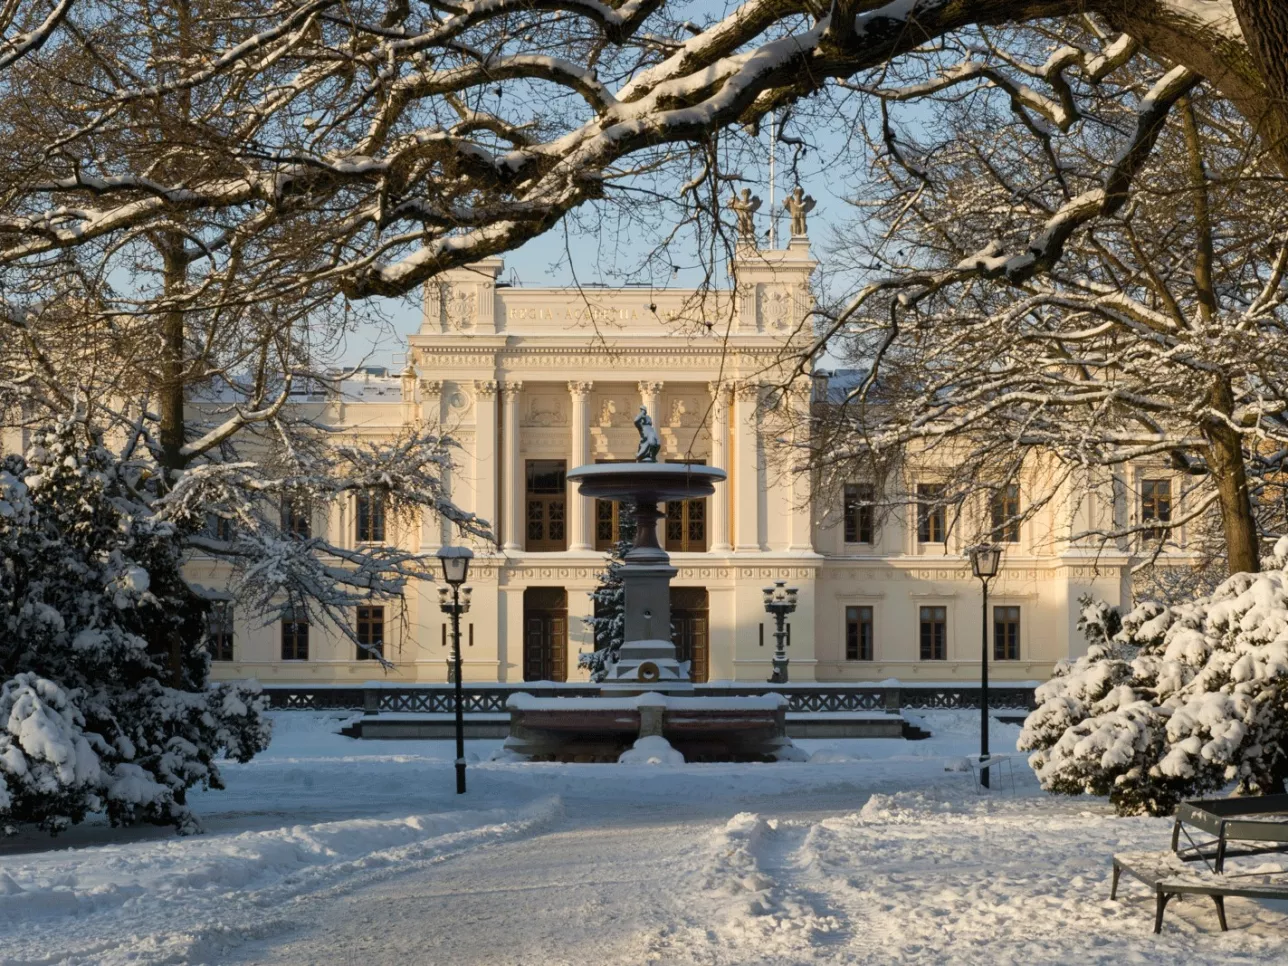 The front of the Main University Building during winter. Photo.